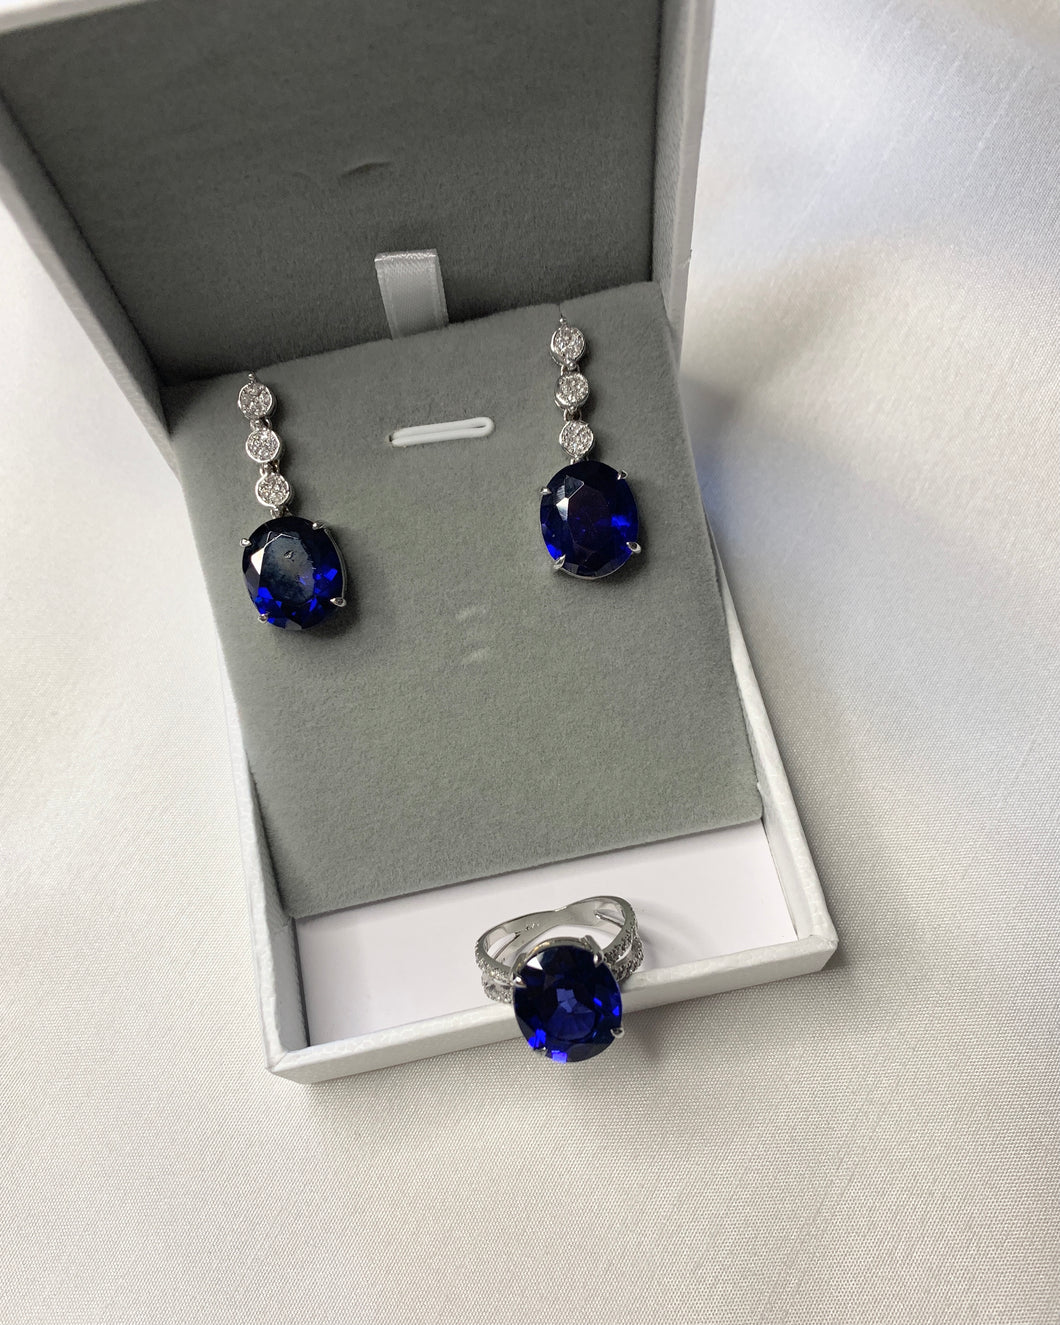 A pair of blue oval sapphires as earrings with 3 round diamonds that makes it into dangling earrings. Paired with an oval blue sapphire ring set in white gold too.